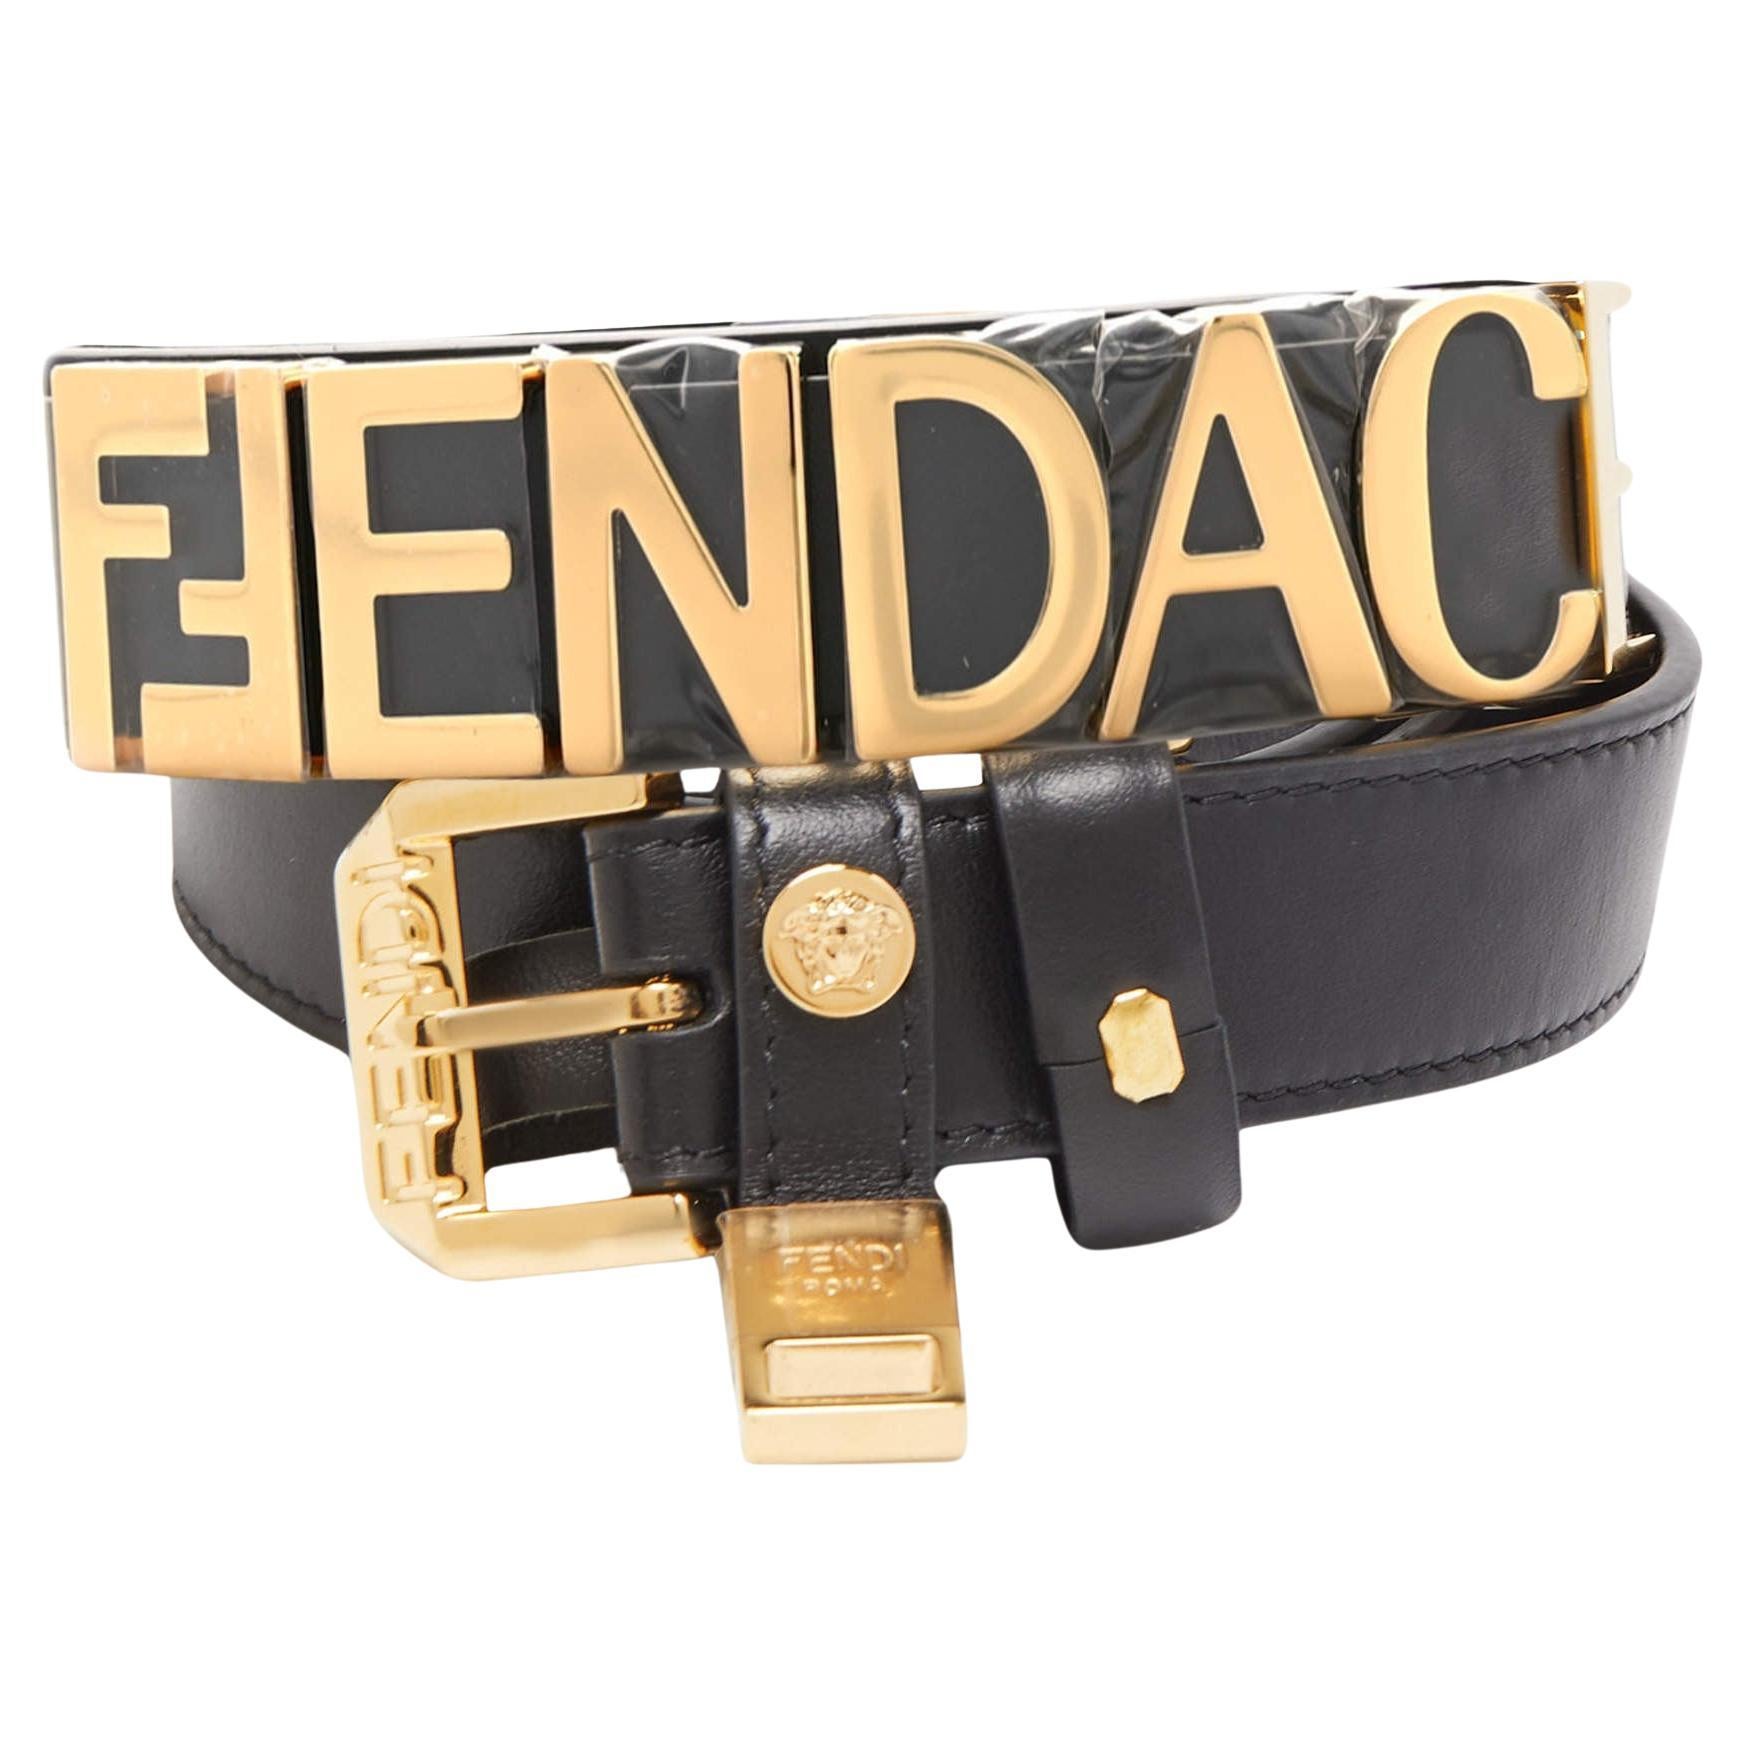 What is the largest size in Fendi men’s belts?